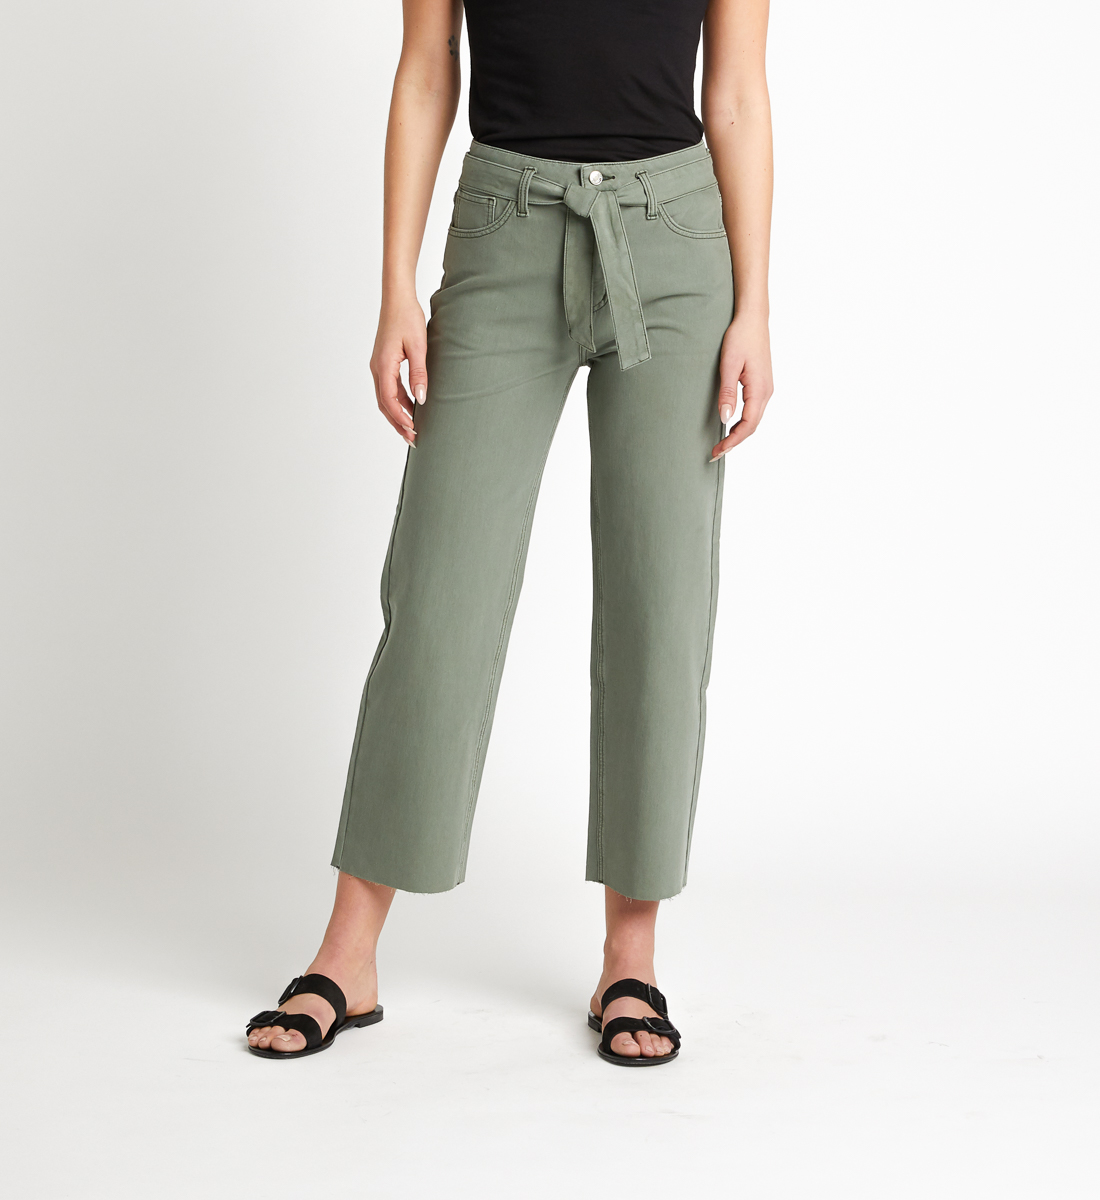 silver jeans cargo pants